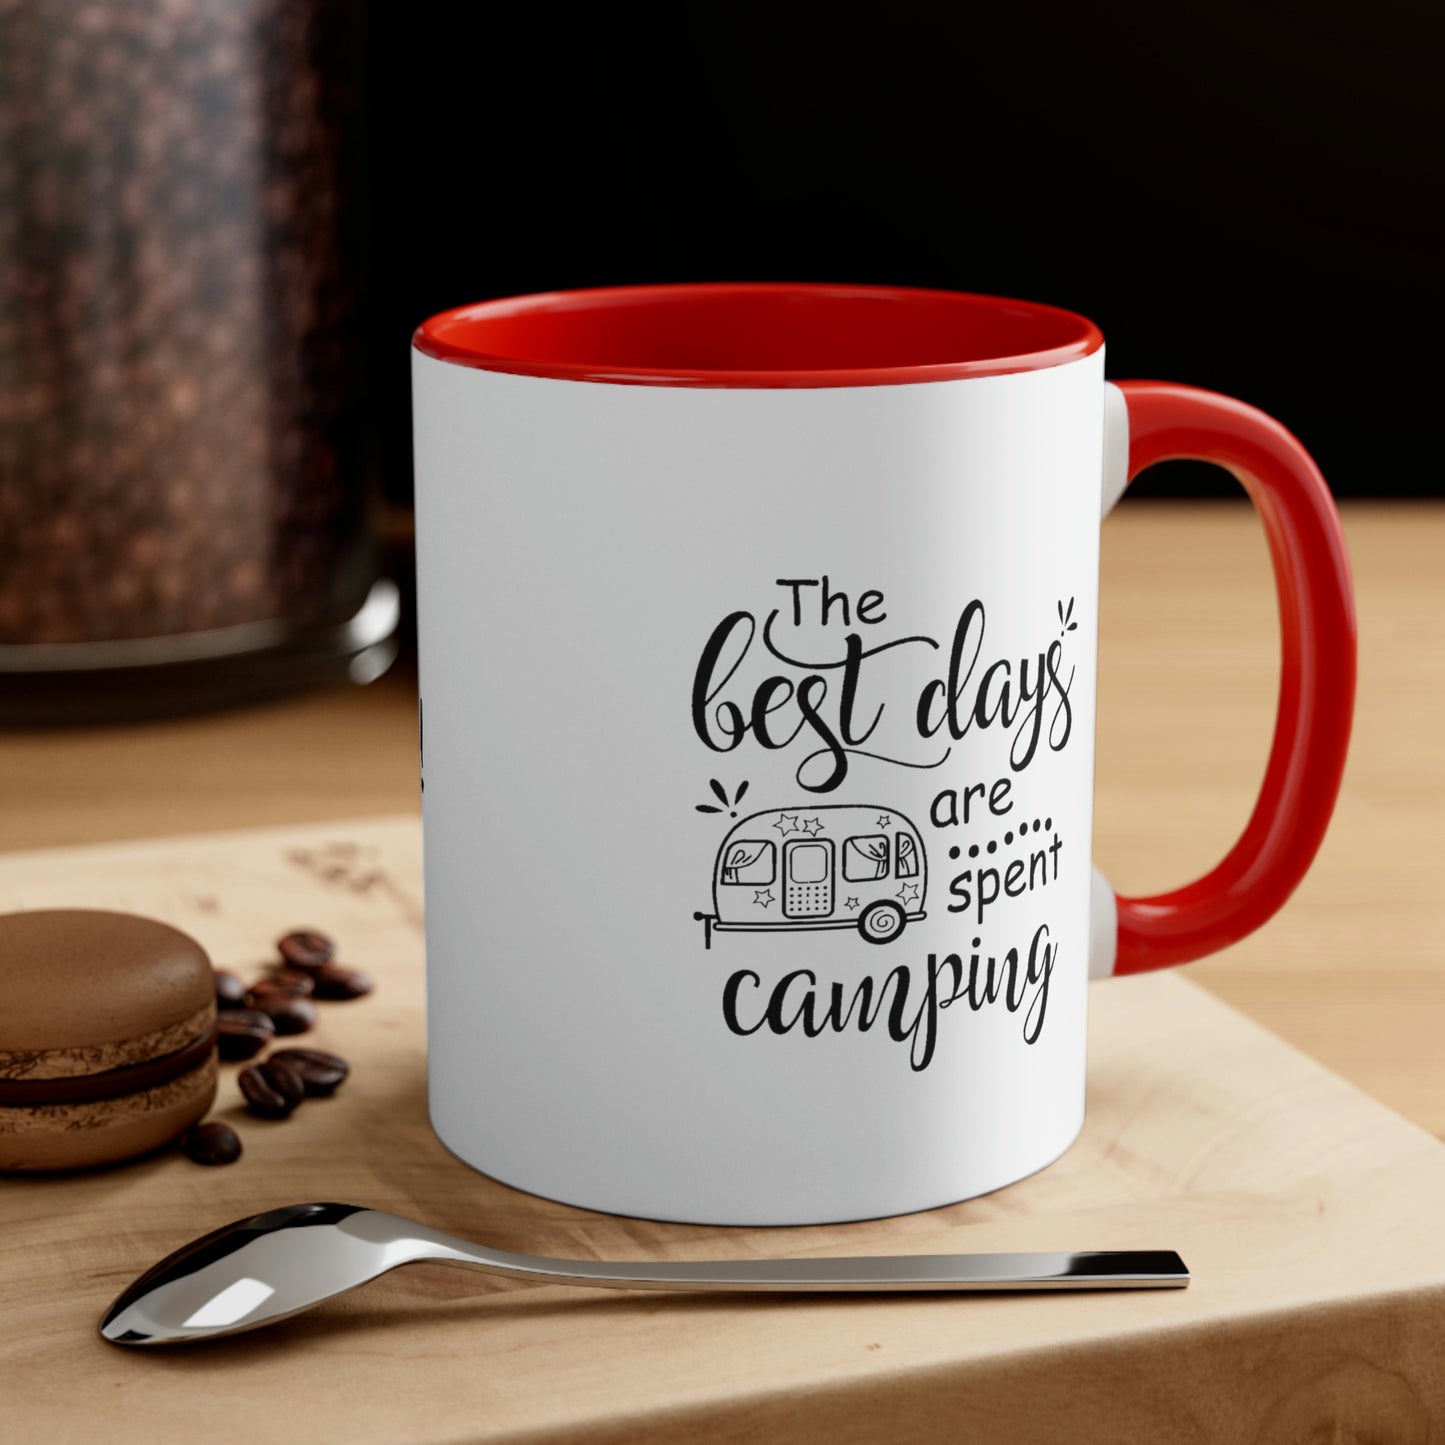 Best Days are Spending Camping Accent Coffee Mug, 11oz